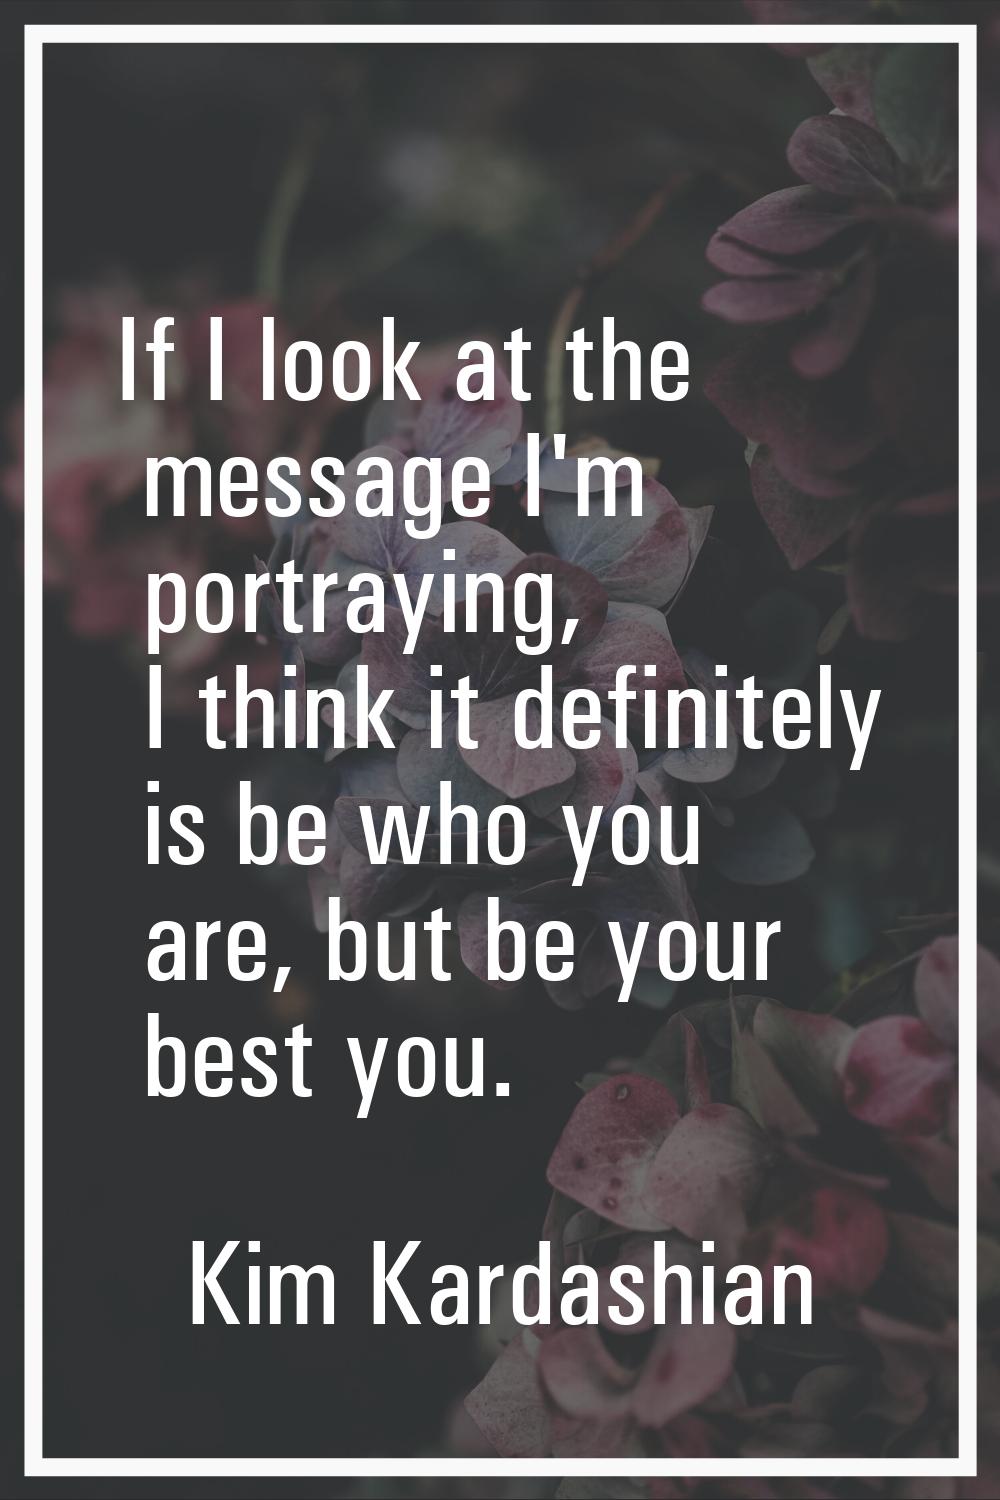 If I look at the message I'm portraying, I think it definitely is be who you are, but be your best 